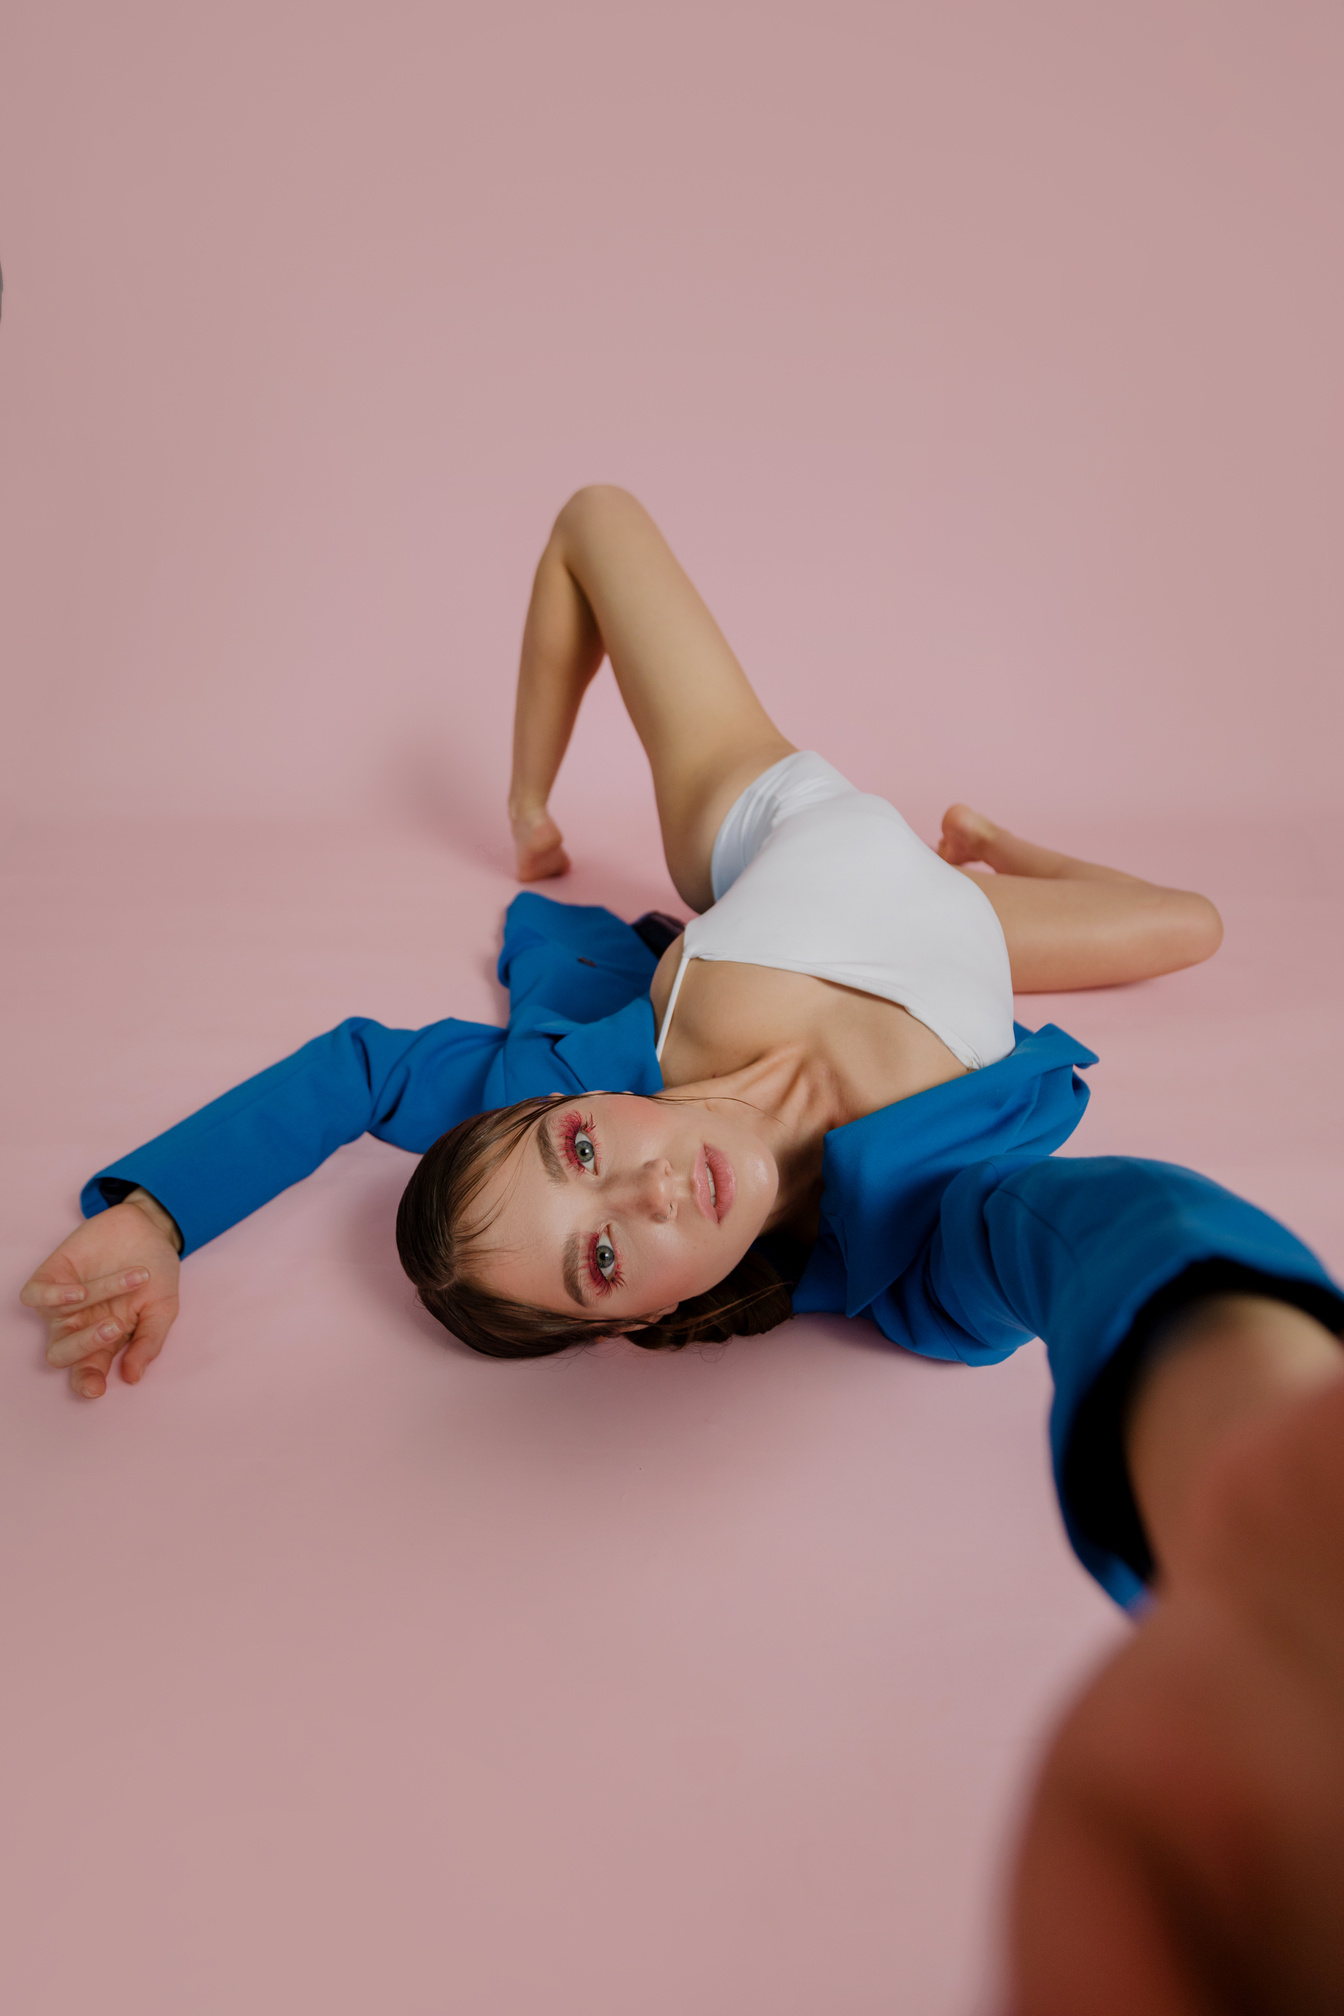 A Woman in White Spaghetti Strap and Blue Coat Lying on a Pink Surface while Looking at the Camera